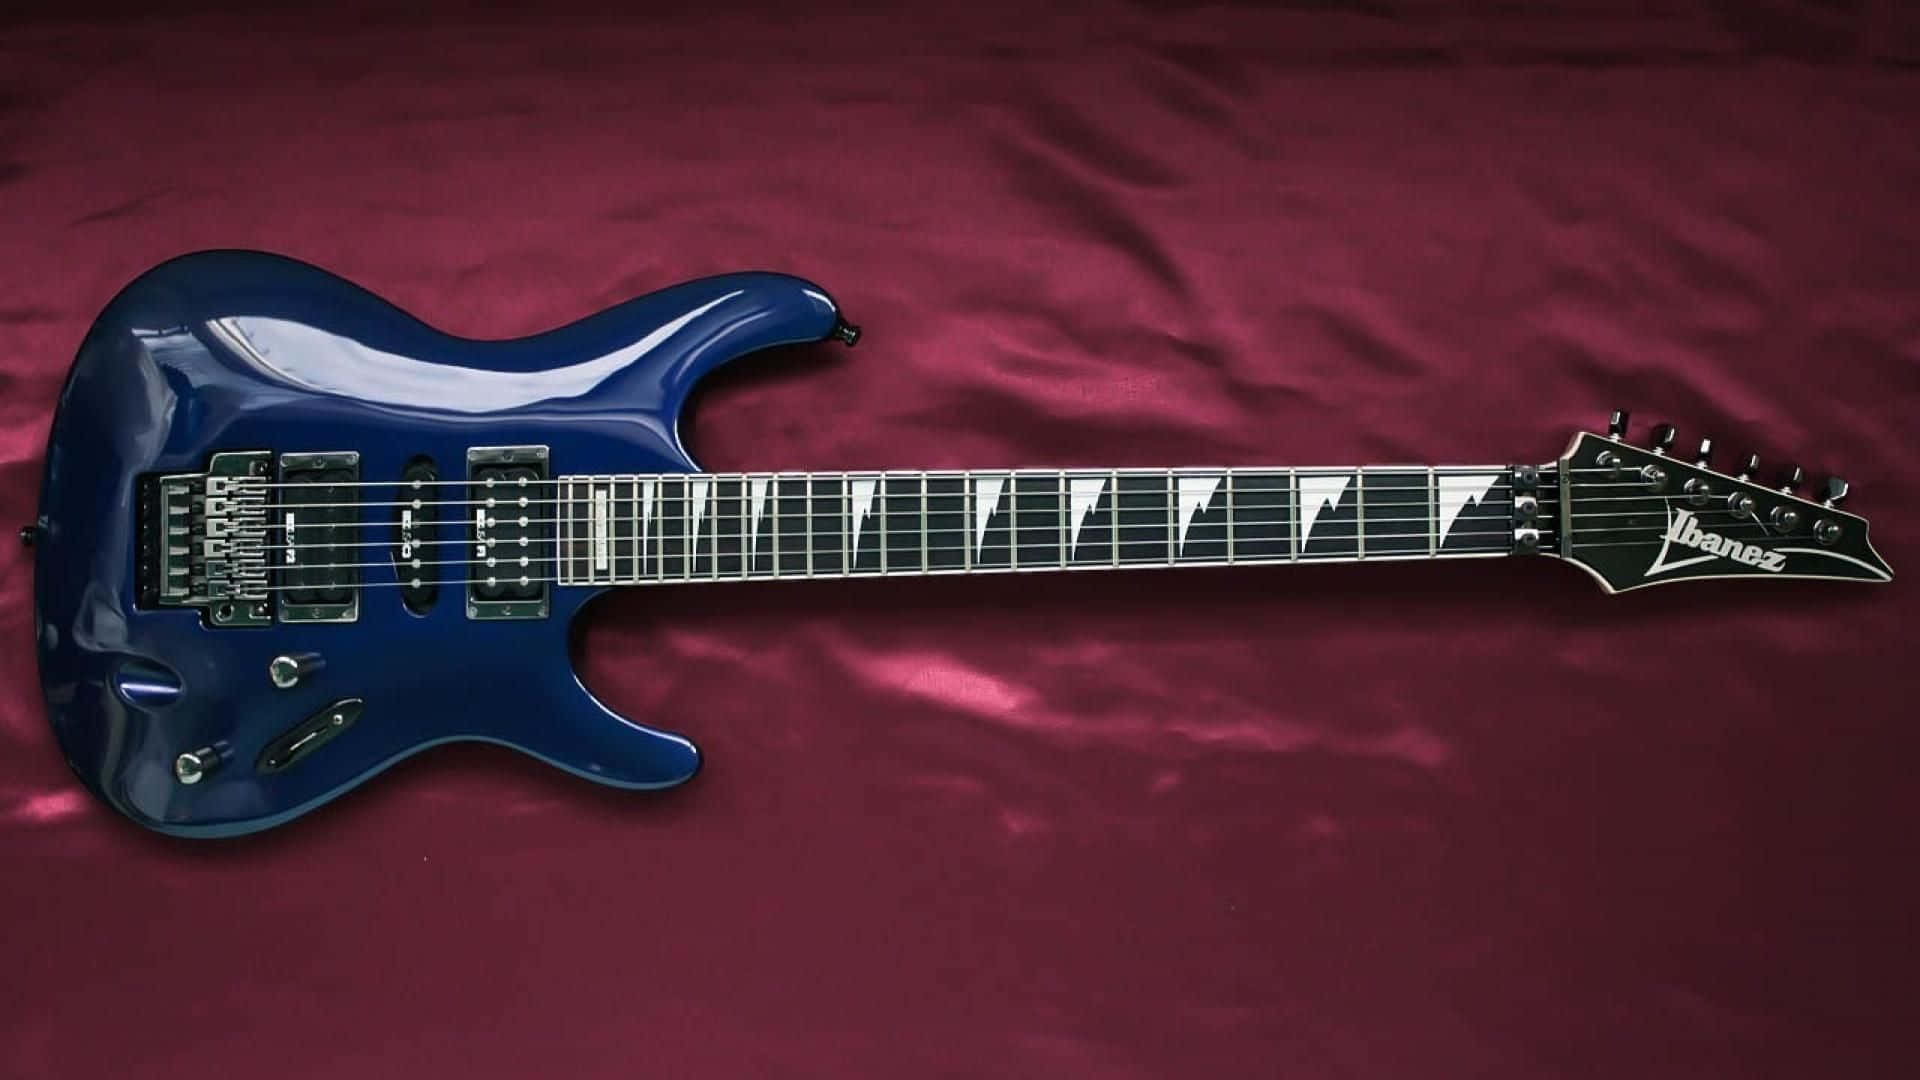 A Blue Electric Guitar With A Black Body